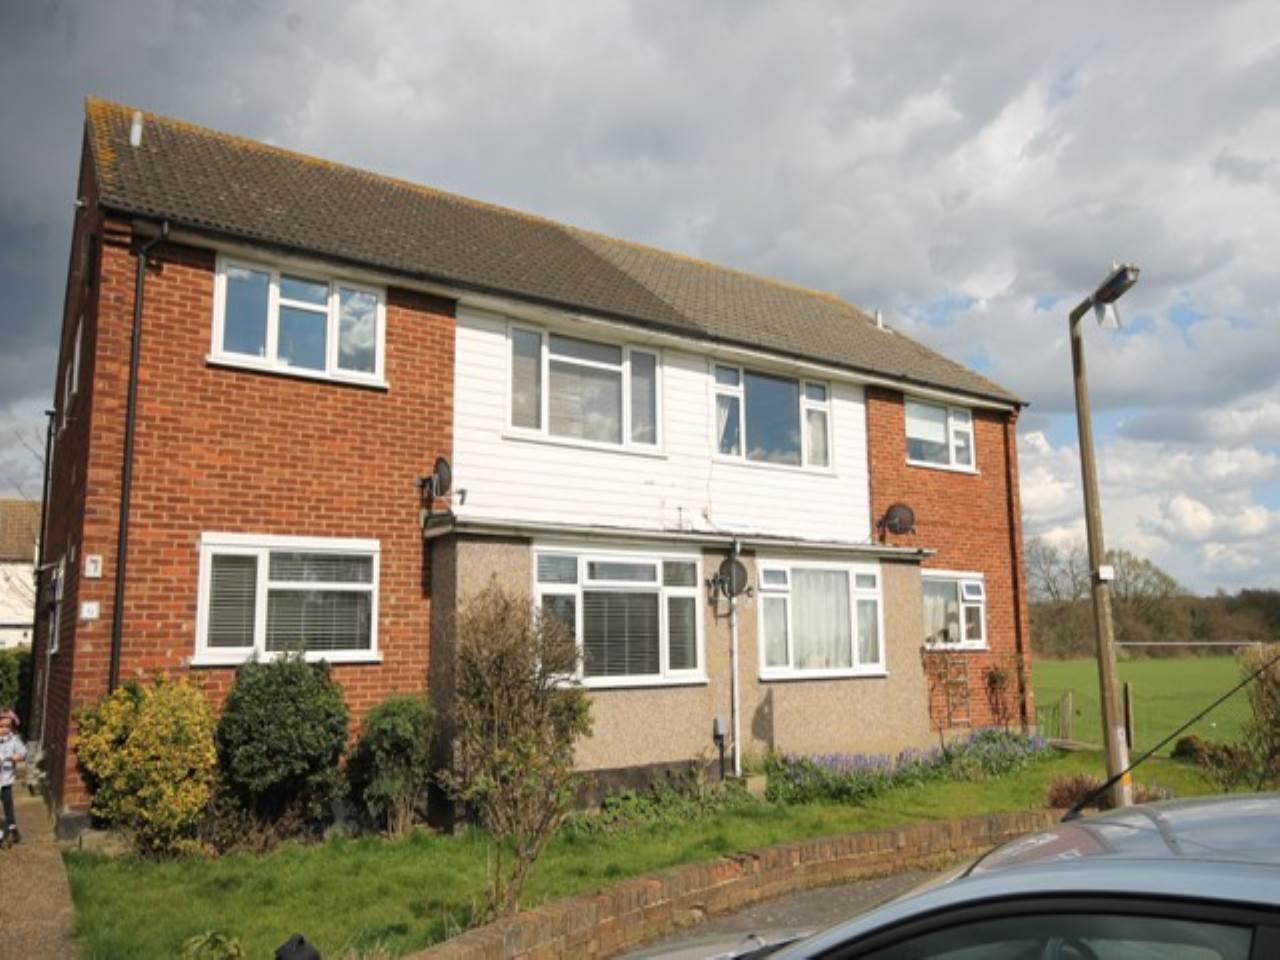 2 bed flat to rent in Avondale Close, Loughton - Property Image 1